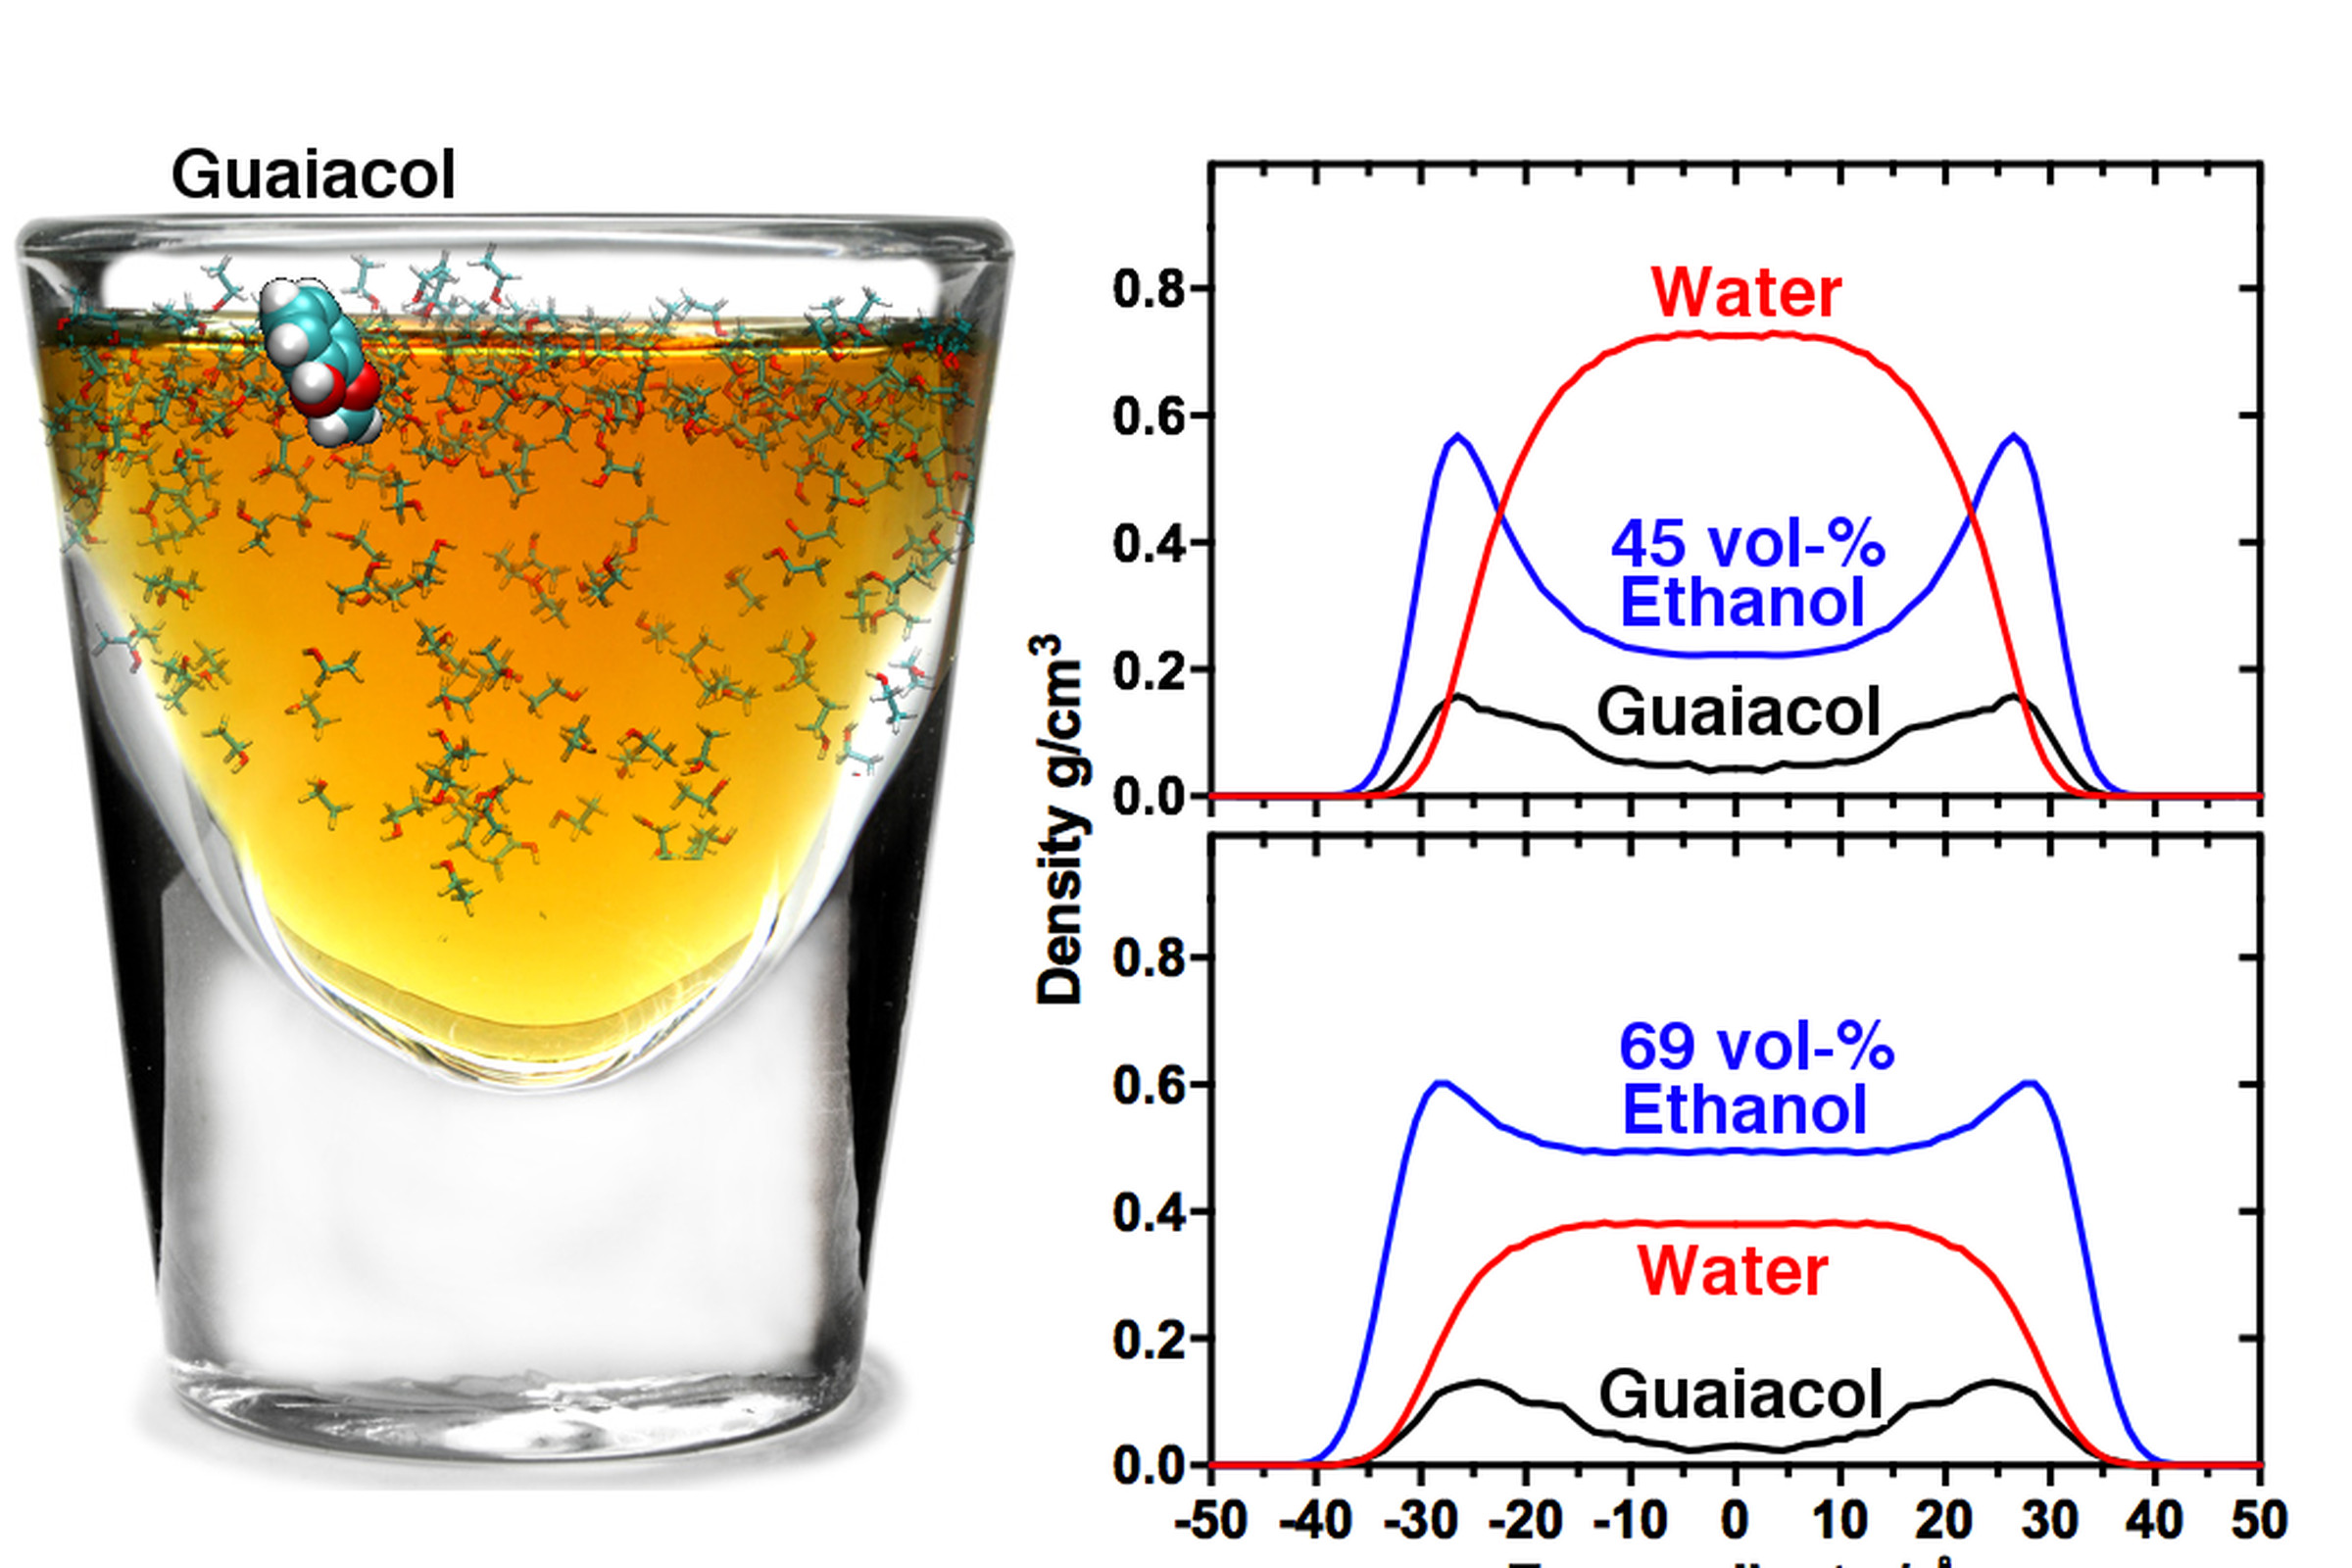 Dilution of cask whisky (69 vol-% of ethanol) drives taste-contributing compounds such as guaiacol to its surface thus improving the taste.